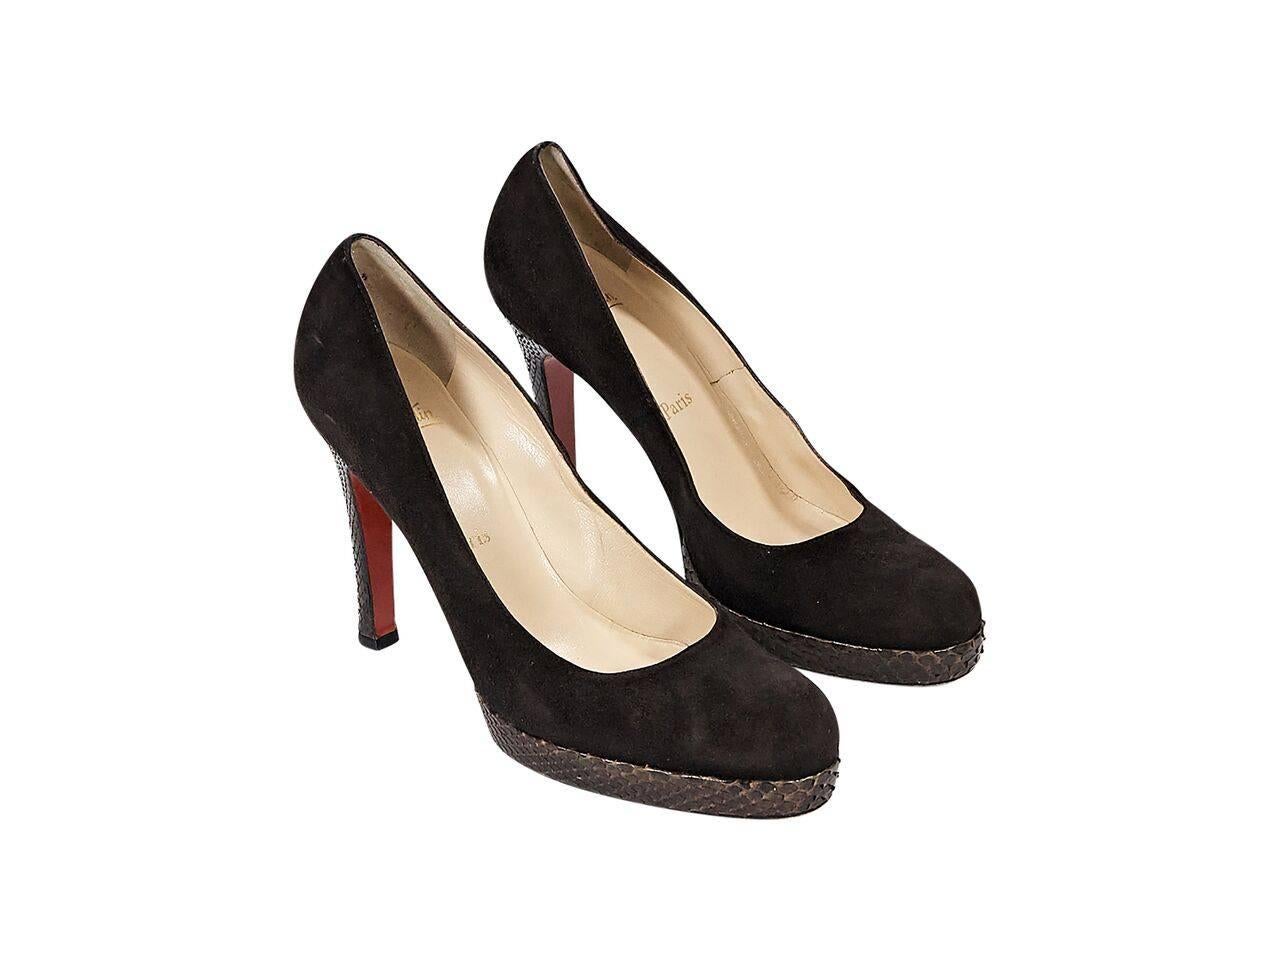 Product details:  Brown suede platform pumps by Christian Louboutin.  Trimmed with python skin.  Round toe.  Iconic red sole.  Slip-on style. 
Condition: Pre-owned. Very good.  
Est. Retail $ 1,300.00